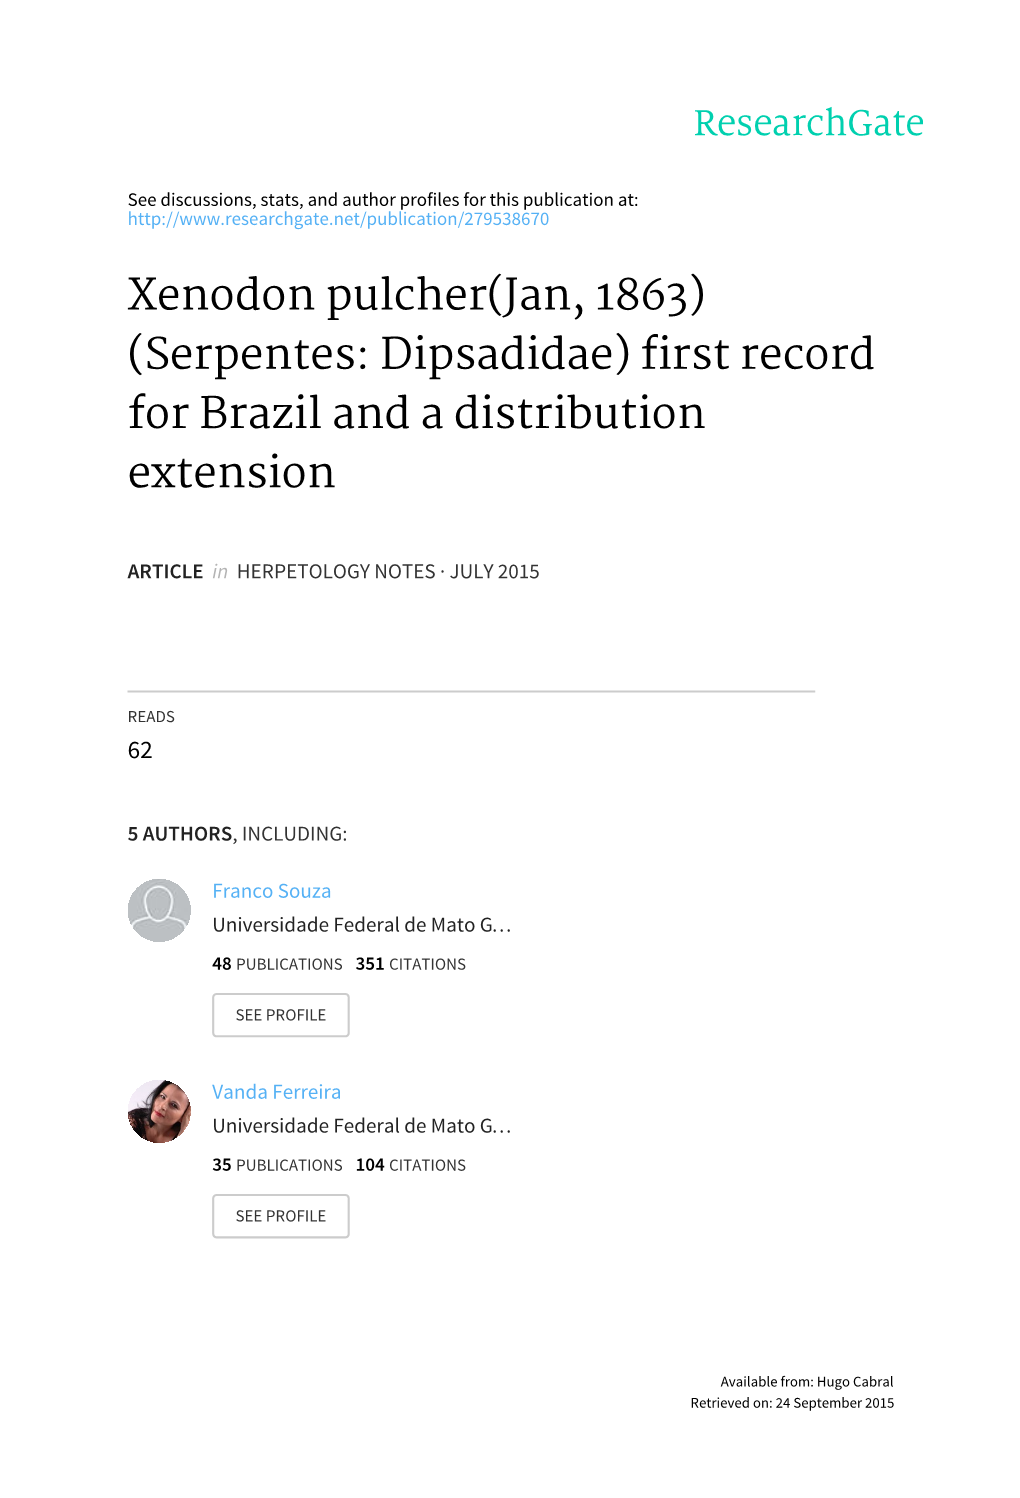 Xenodon Pulcher(Jan, 1863) (Serpentes: Dipsadidae) First Record for Brazil and a Distribution Extension